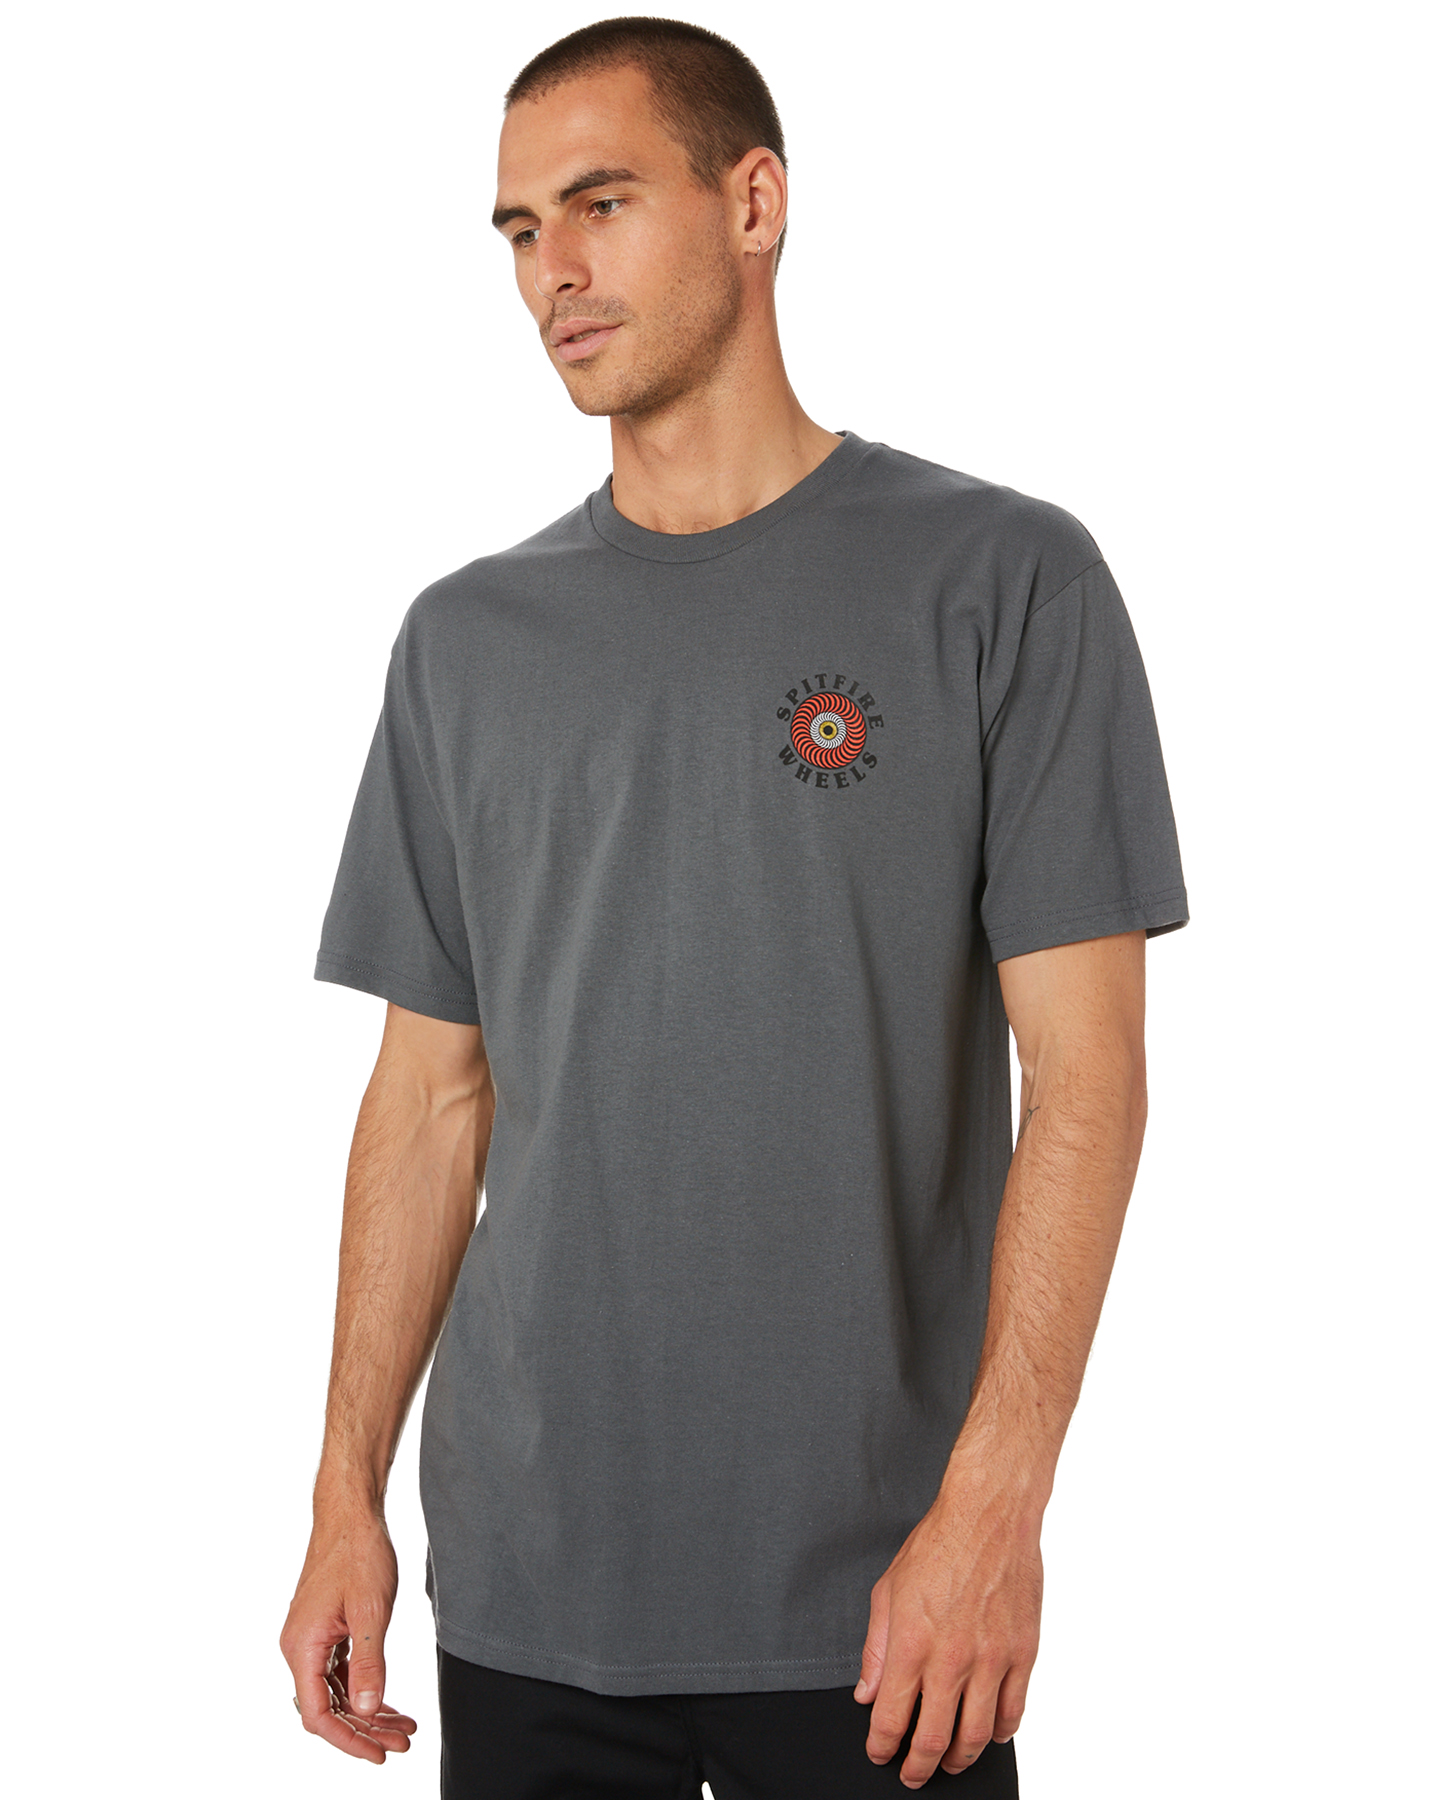 Spitfire Og Classic Fill Mens Tee - Charcoal Multi | SurfStitch